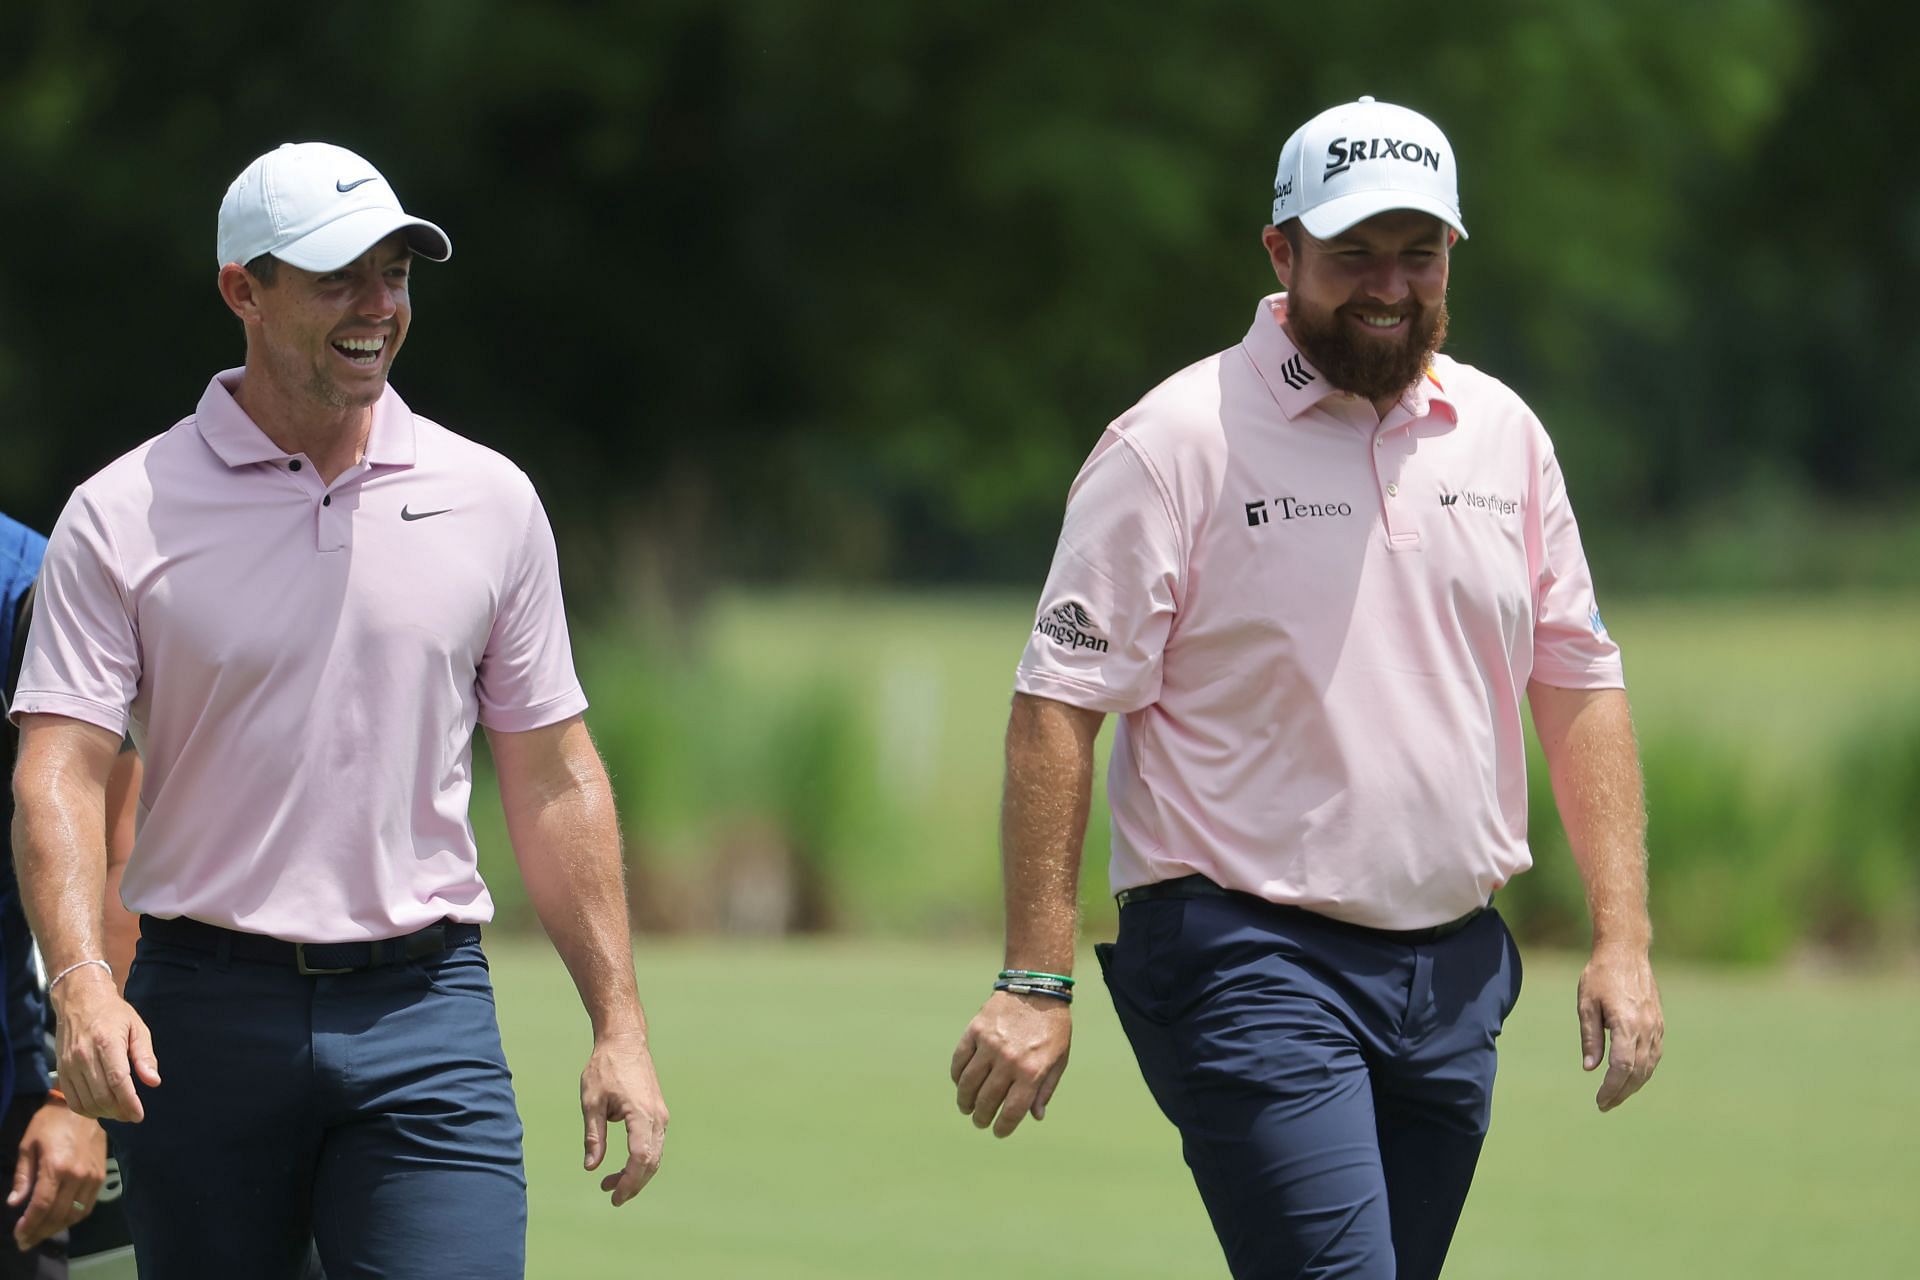 Shane Lowry and Rory McIlroy at the Zurich Classic